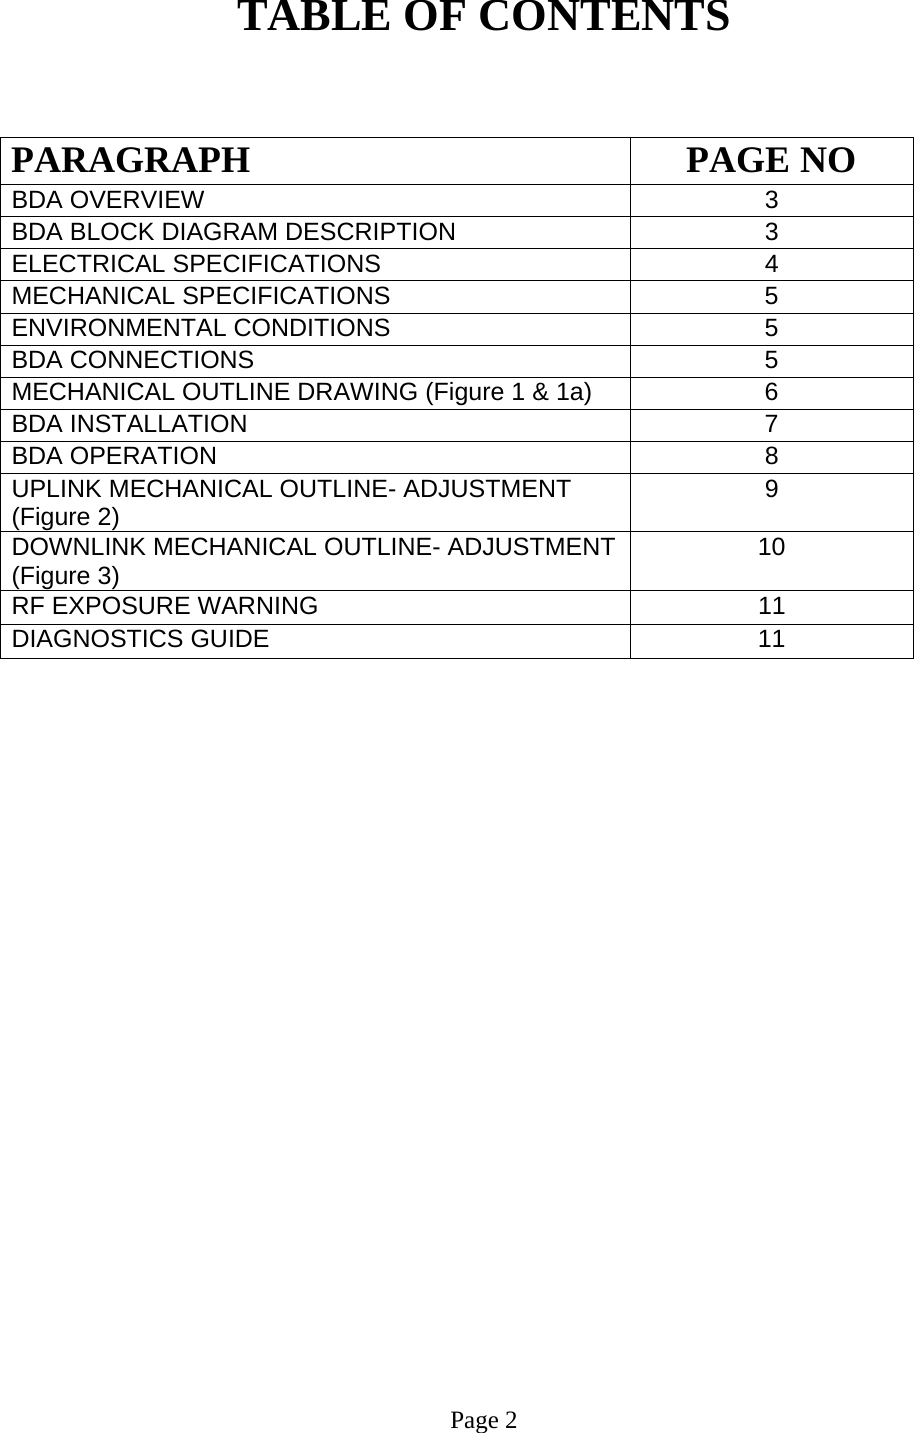 TABLE OF CONTENTS   PARAGRAPH PAGE NO BDA OVERVIEW   3 BDA BLOCK DIAGRAM DESCRIPTION 3 ELECTRICAL SPECIFICATIONS   4 MECHANICAL SPECIFICATIONS   5  ENVIRONMENTAL CONDITIONS   5  BDA CONNECTIONS    5  MECHANICAL OUTLINE DRAWING (Figure 1 &amp; 1a)  6  BDA INSTALLATION  7 BDA OPERATION 8  UPLINK MECHANICAL OUTLINE- ADJUSTMENT (Figure 2)  9  DOWNLINK MECHANICAL OUTLINE- ADJUSTMENT (Figure 3)  10 RF EXPOSURE WARNING   11 DIAGNOSTICS GUIDE  11                            Page 2  